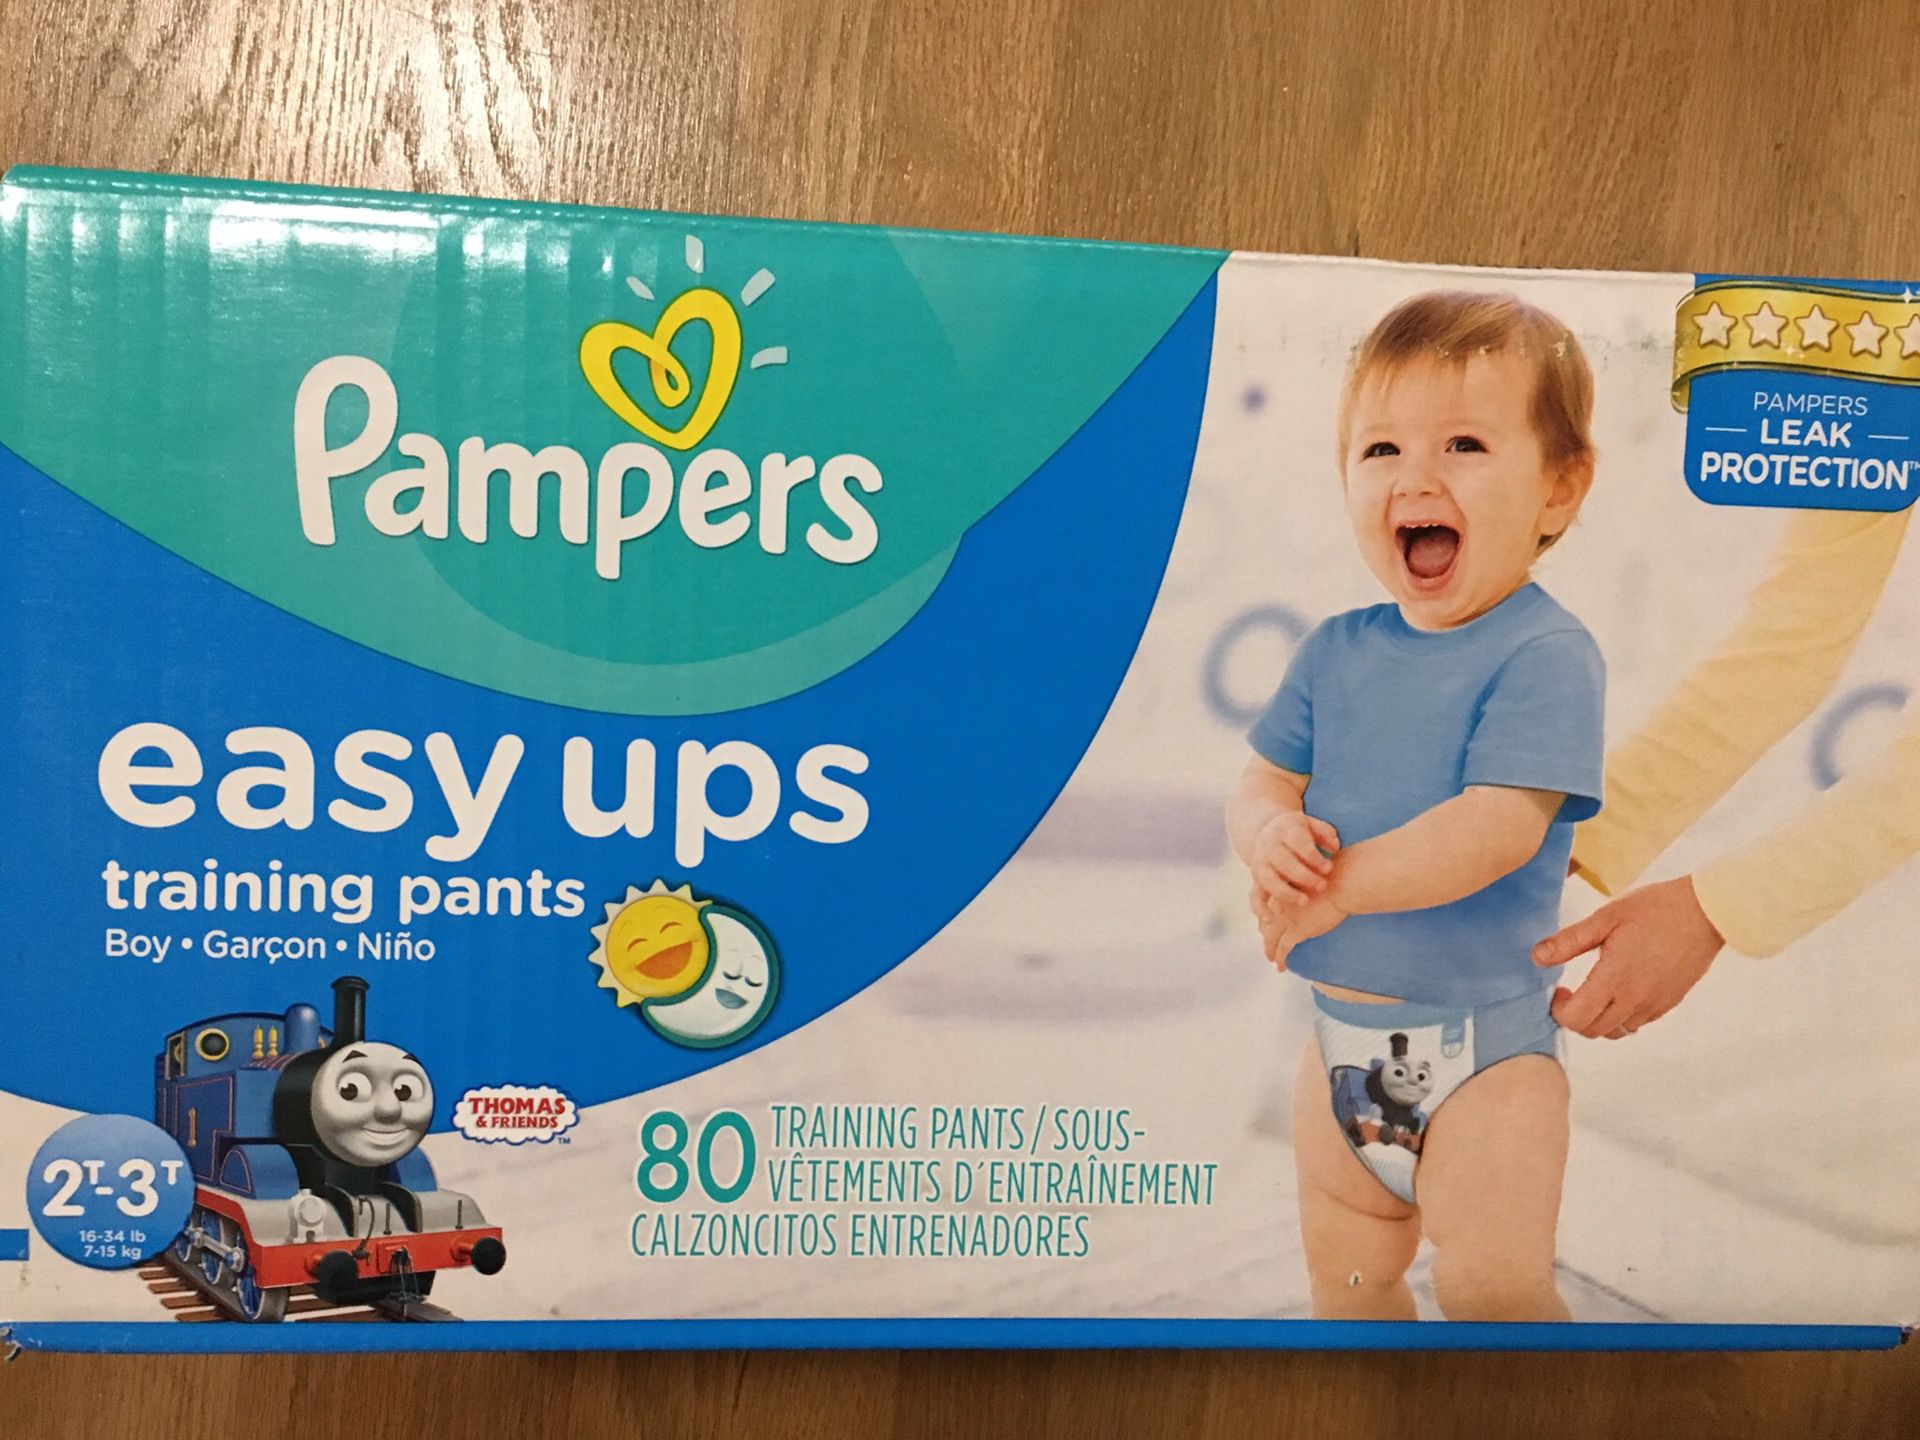 Pampers easy ups training pants, 2T-3T